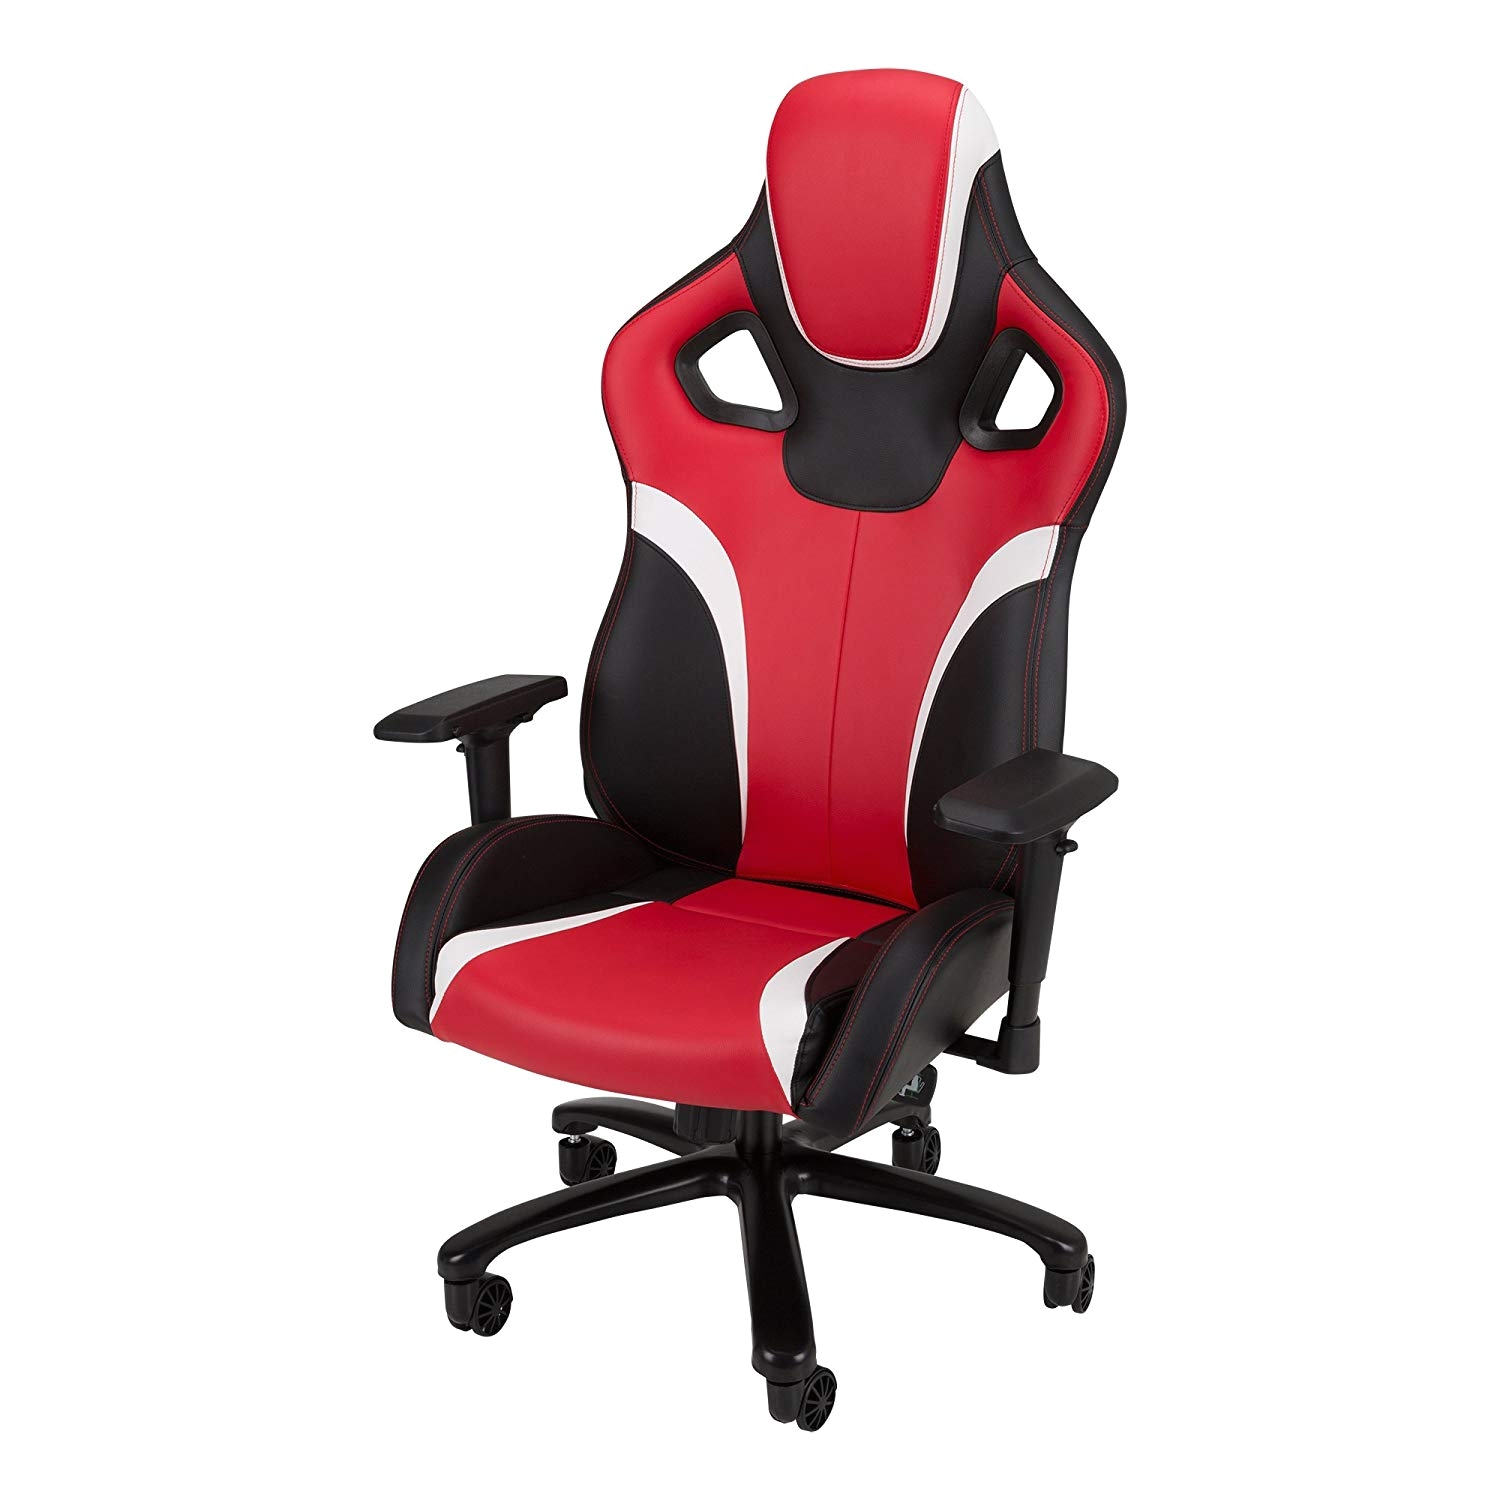 Cheap Racing Computer Chair Amazon Com Galaxy Xl Big and Tall Large Size Gaming Chair by